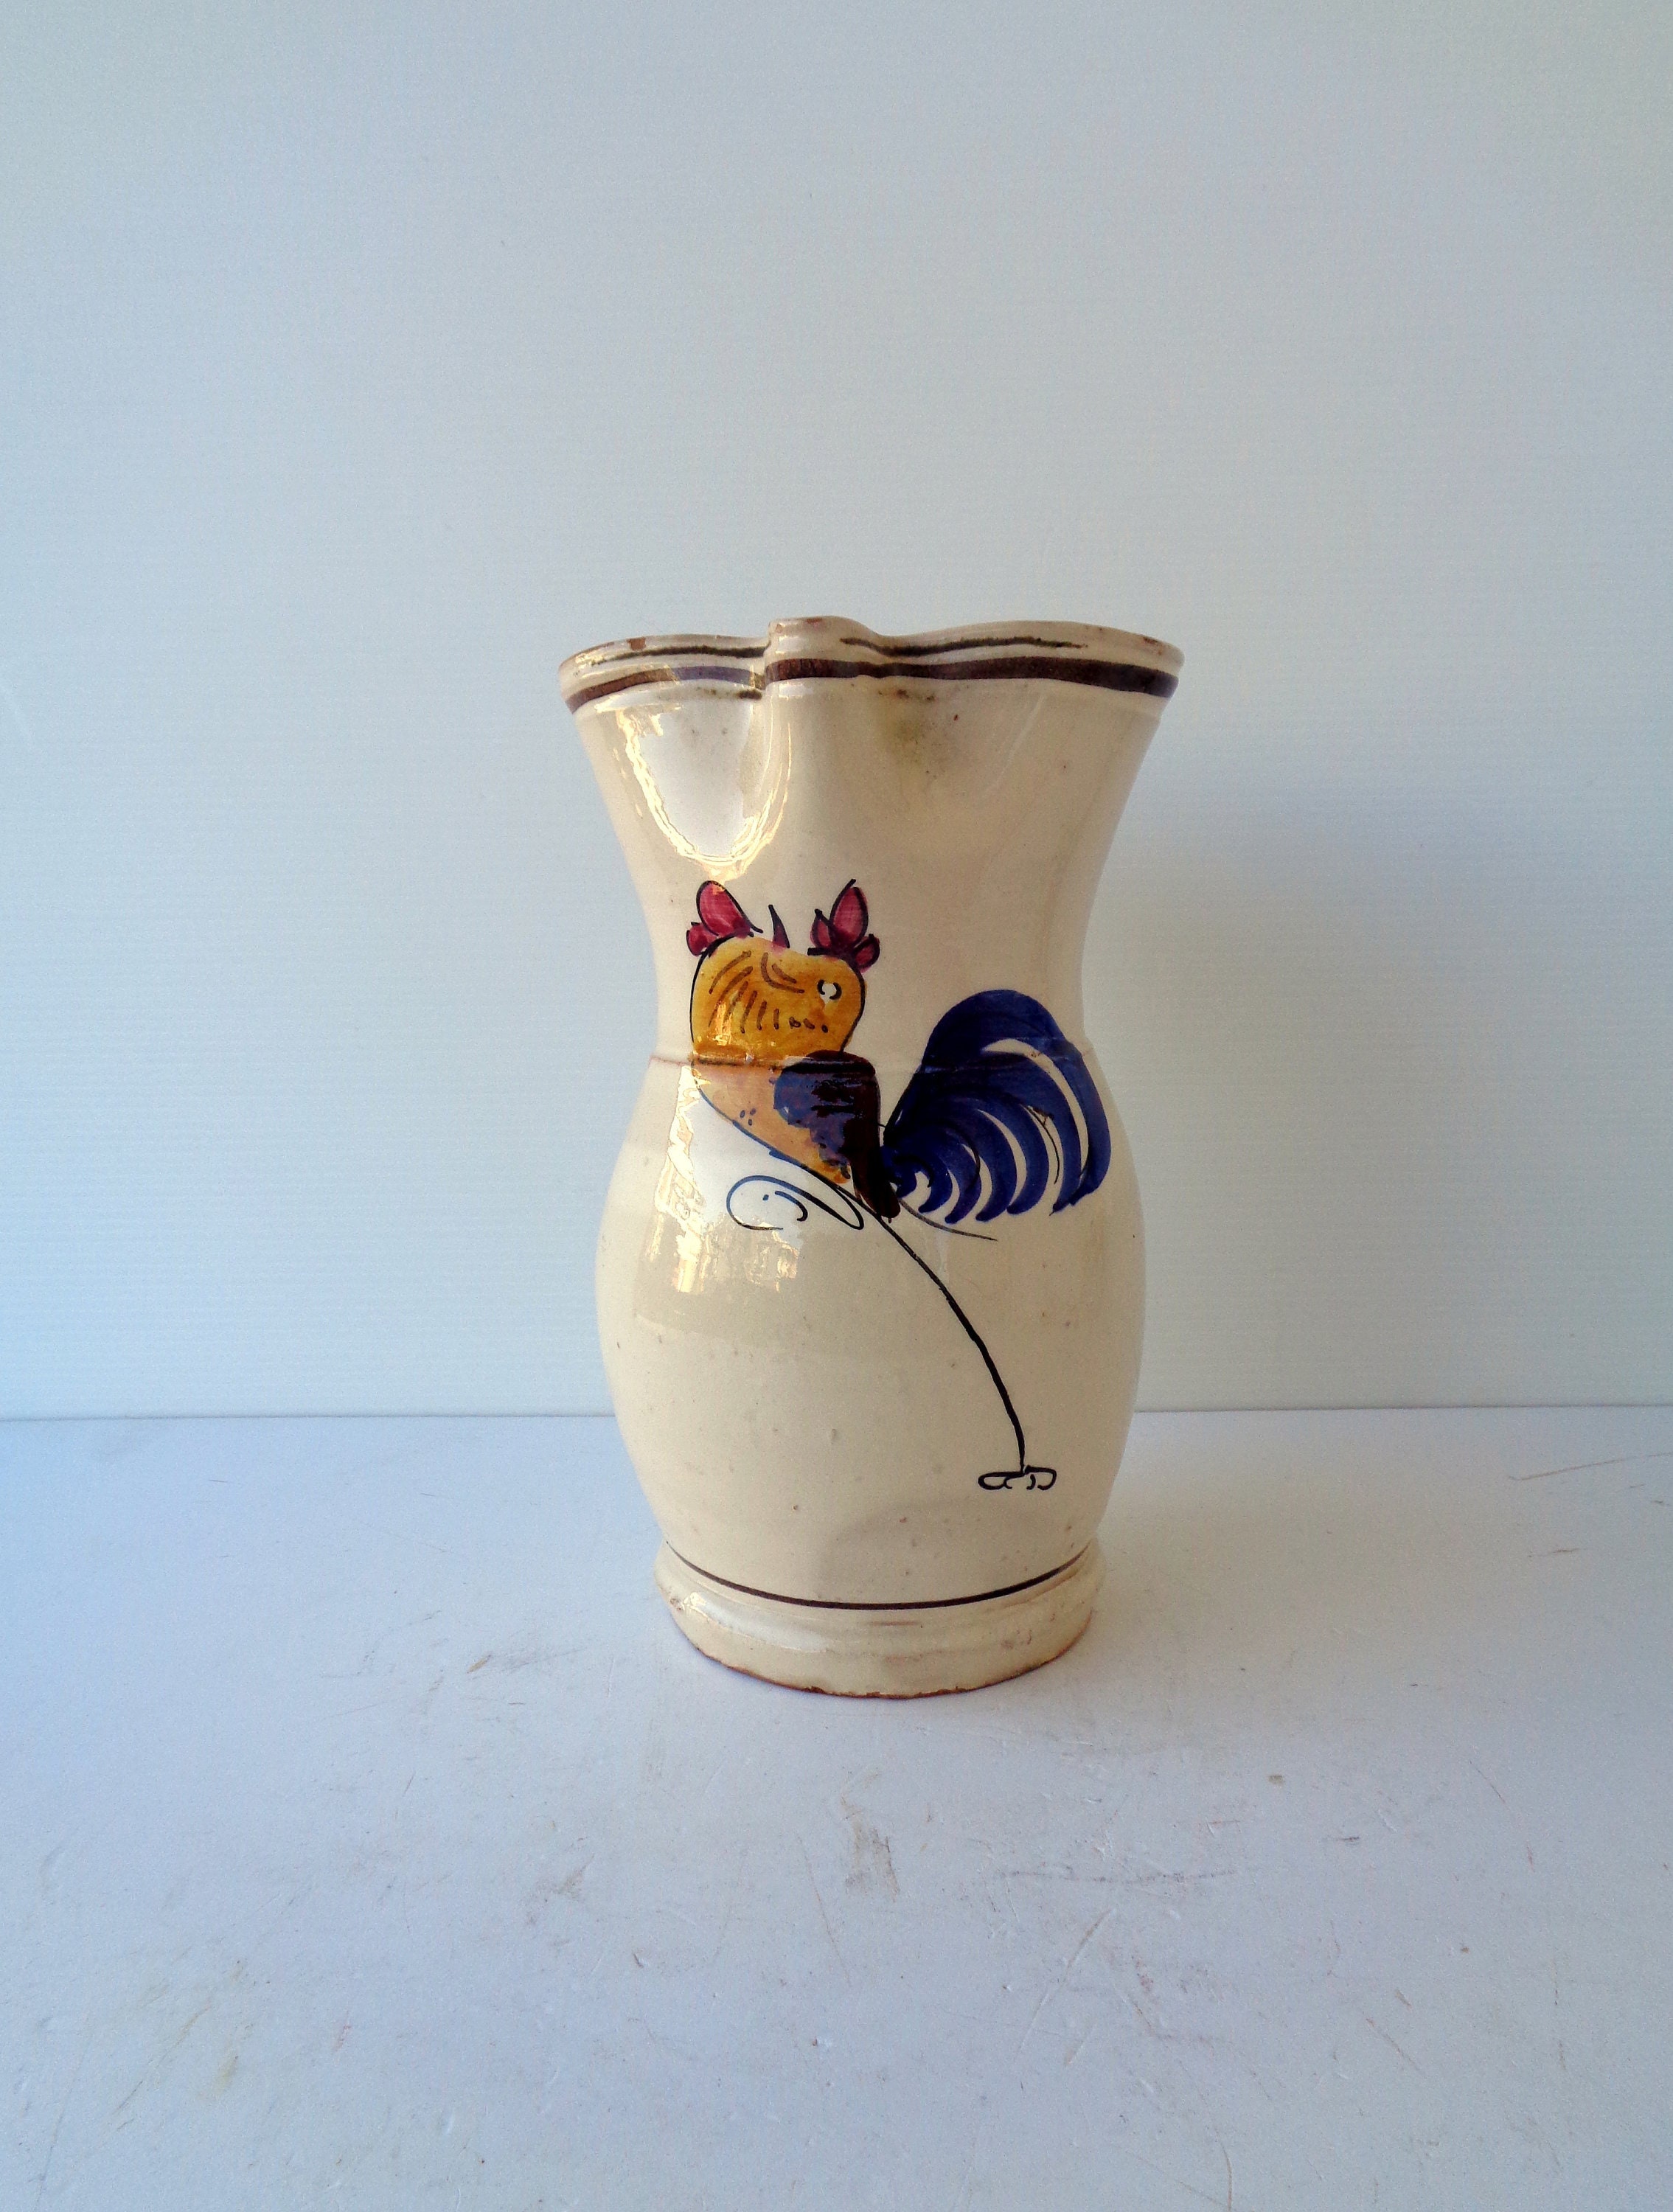 handmade Italian majolica glazed earthenware jug for wine or water Rustic terracotta decorations hand-painted rooster jug Old pitcher